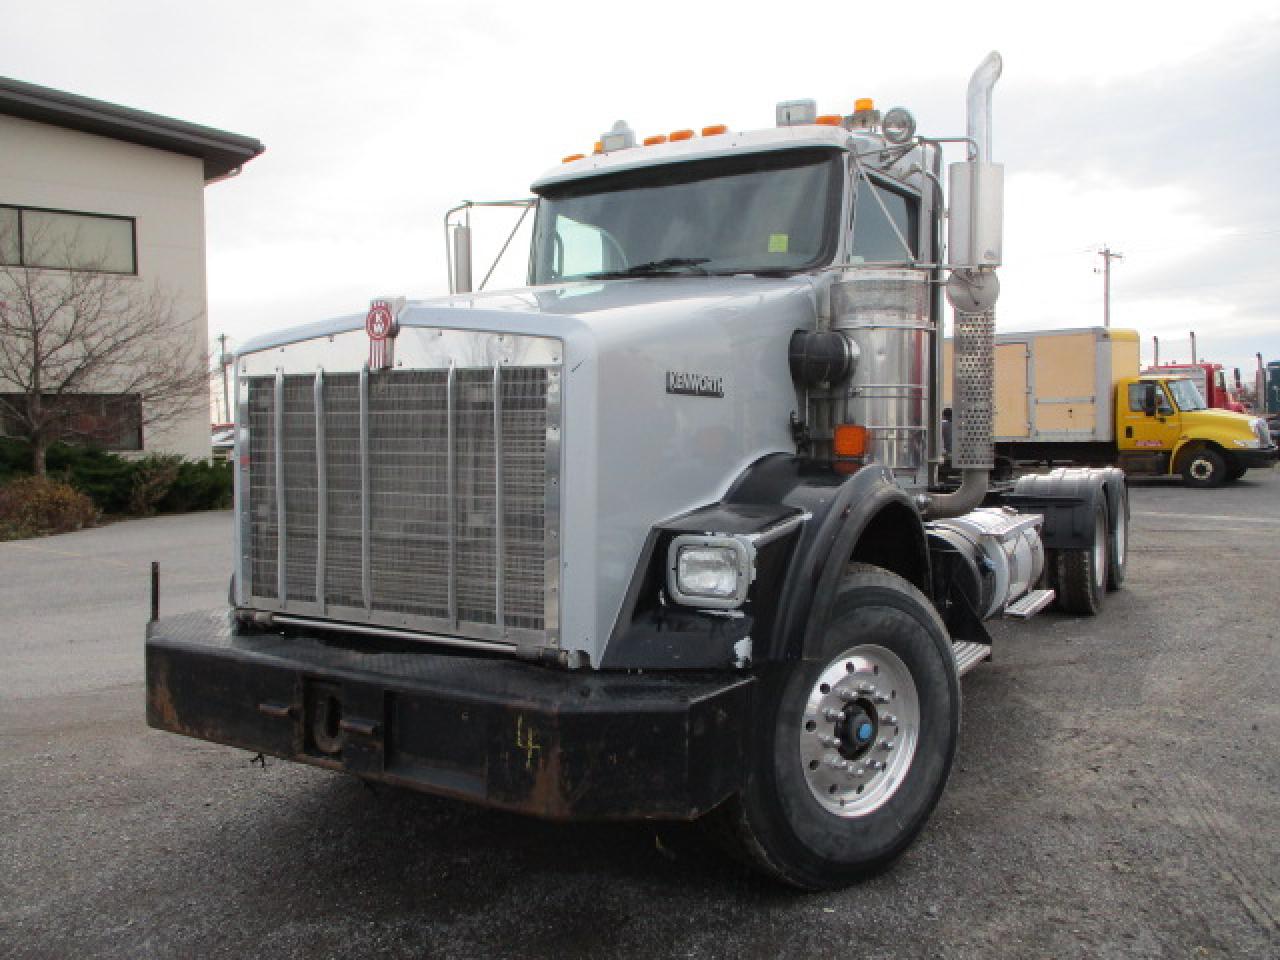 Used 2013 KENWORTH T800 For Sale in Caledonia, NY 14423 Grape 4.9